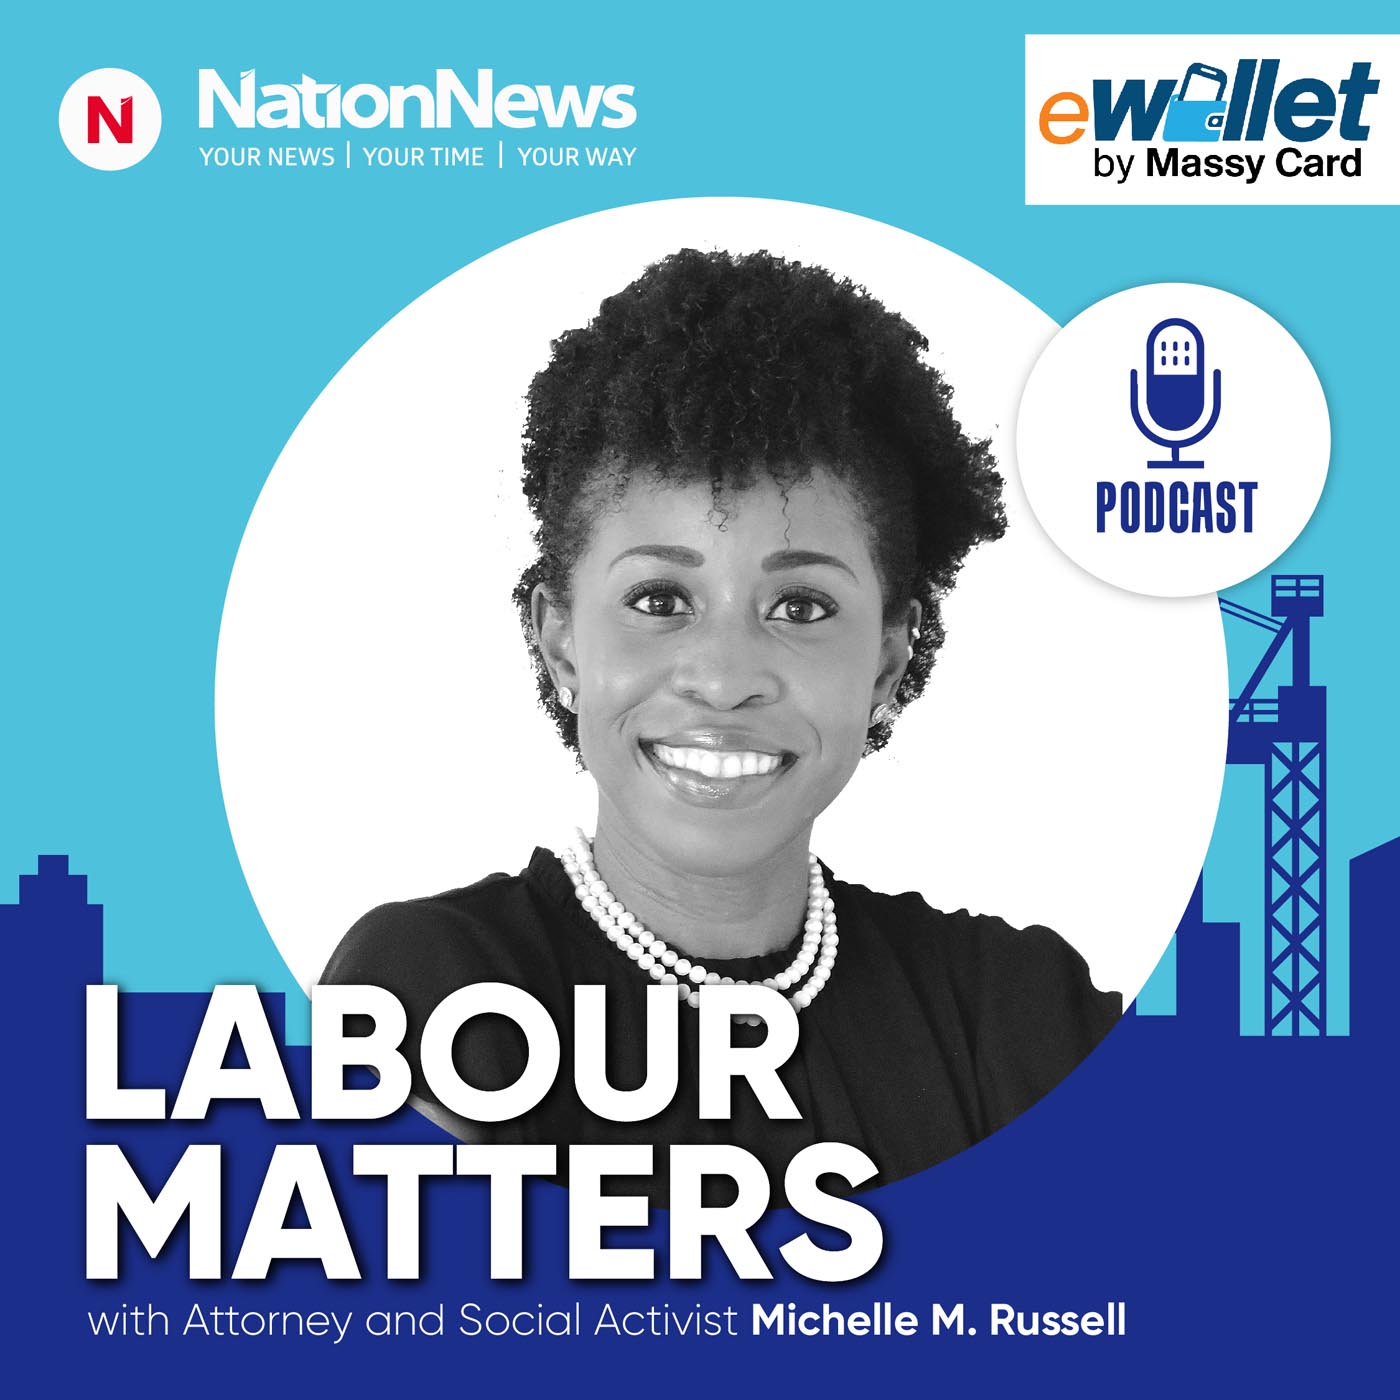 Labour Matters Episode 2: Covid-19 vaccines and employees 2